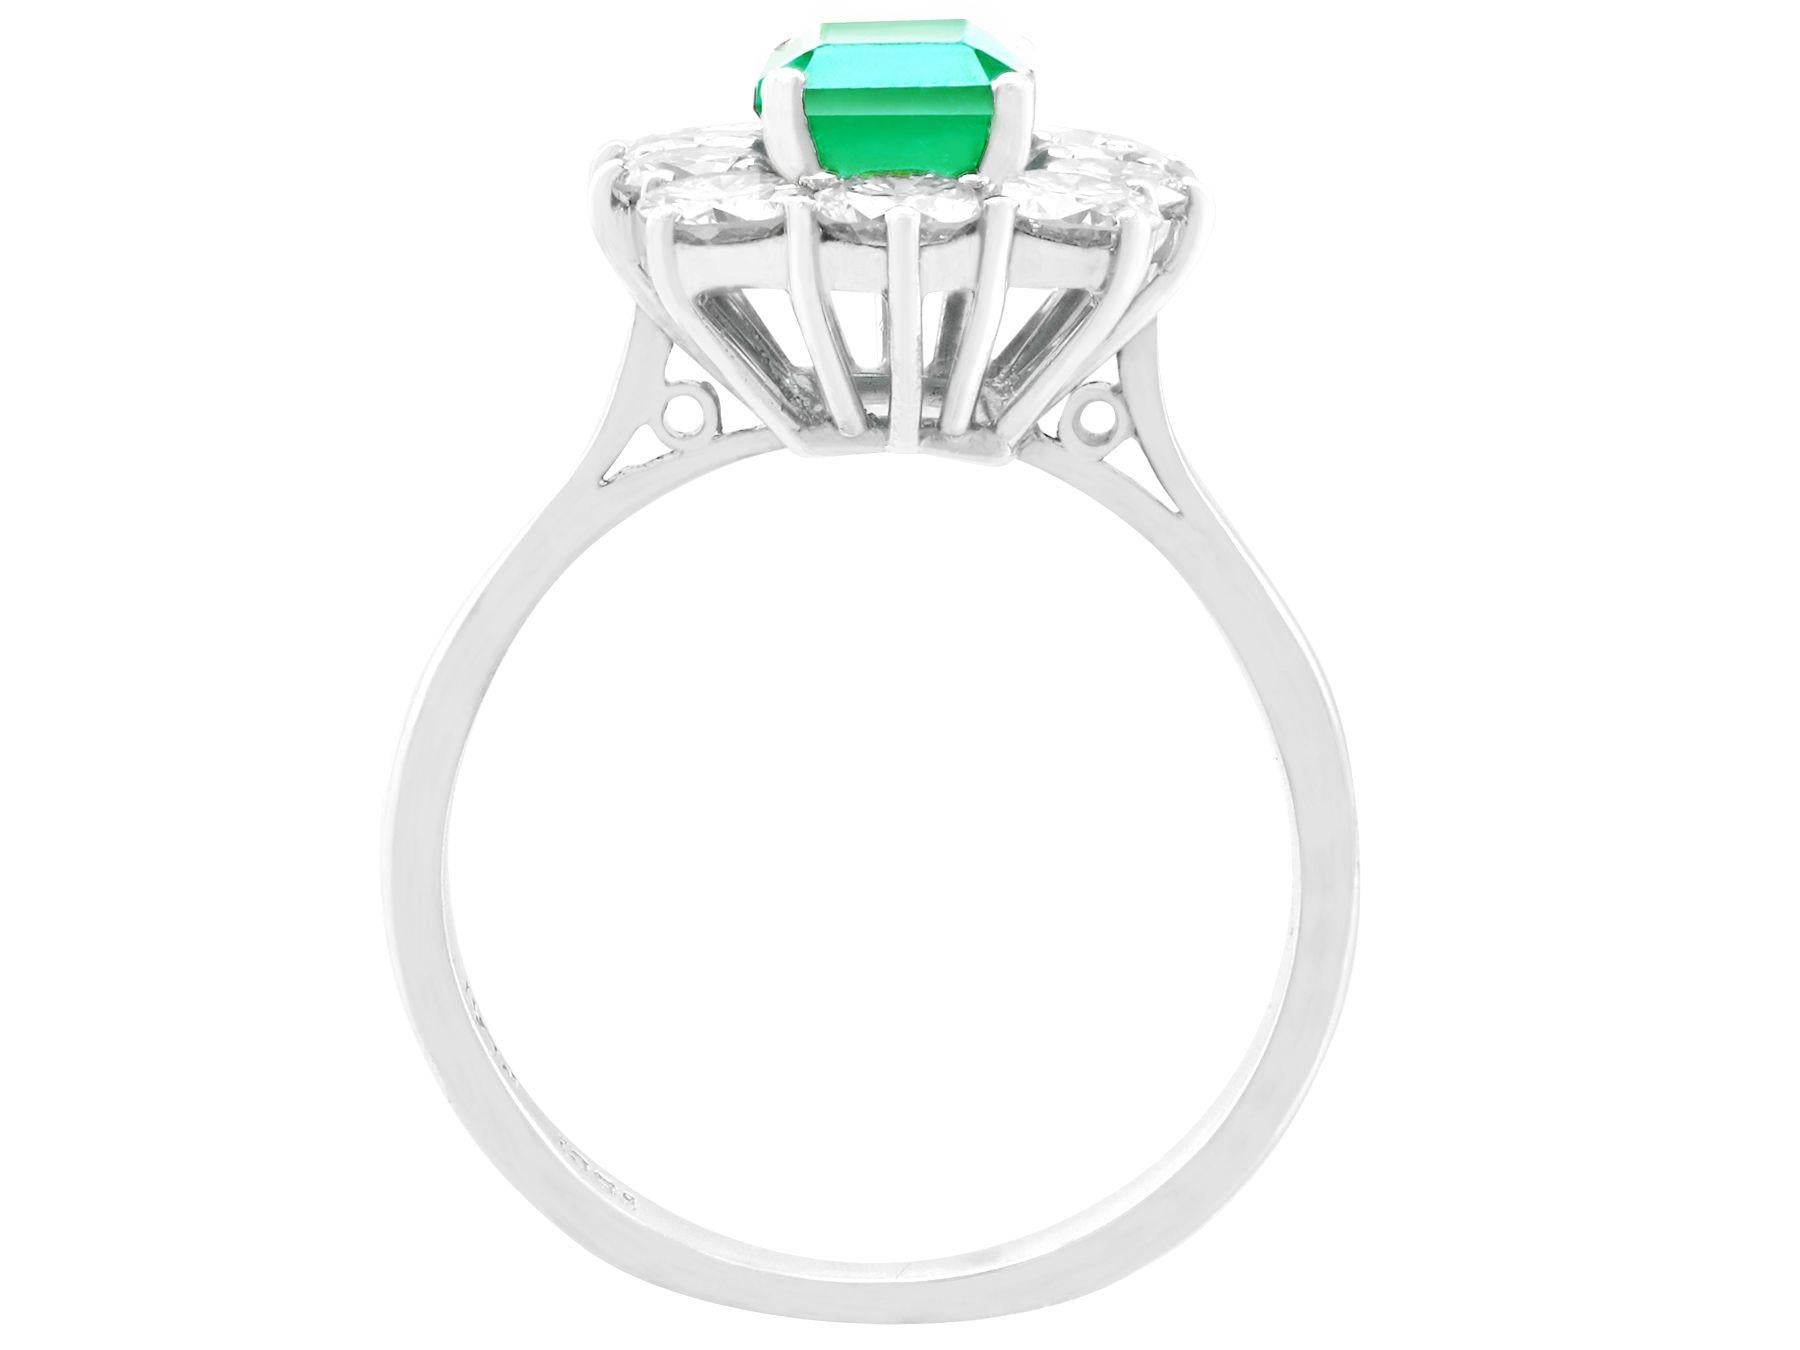 Women's 1940s Vintage 1.57ct Emerald and 1.72ct Diamond White Gold Engagement Ring